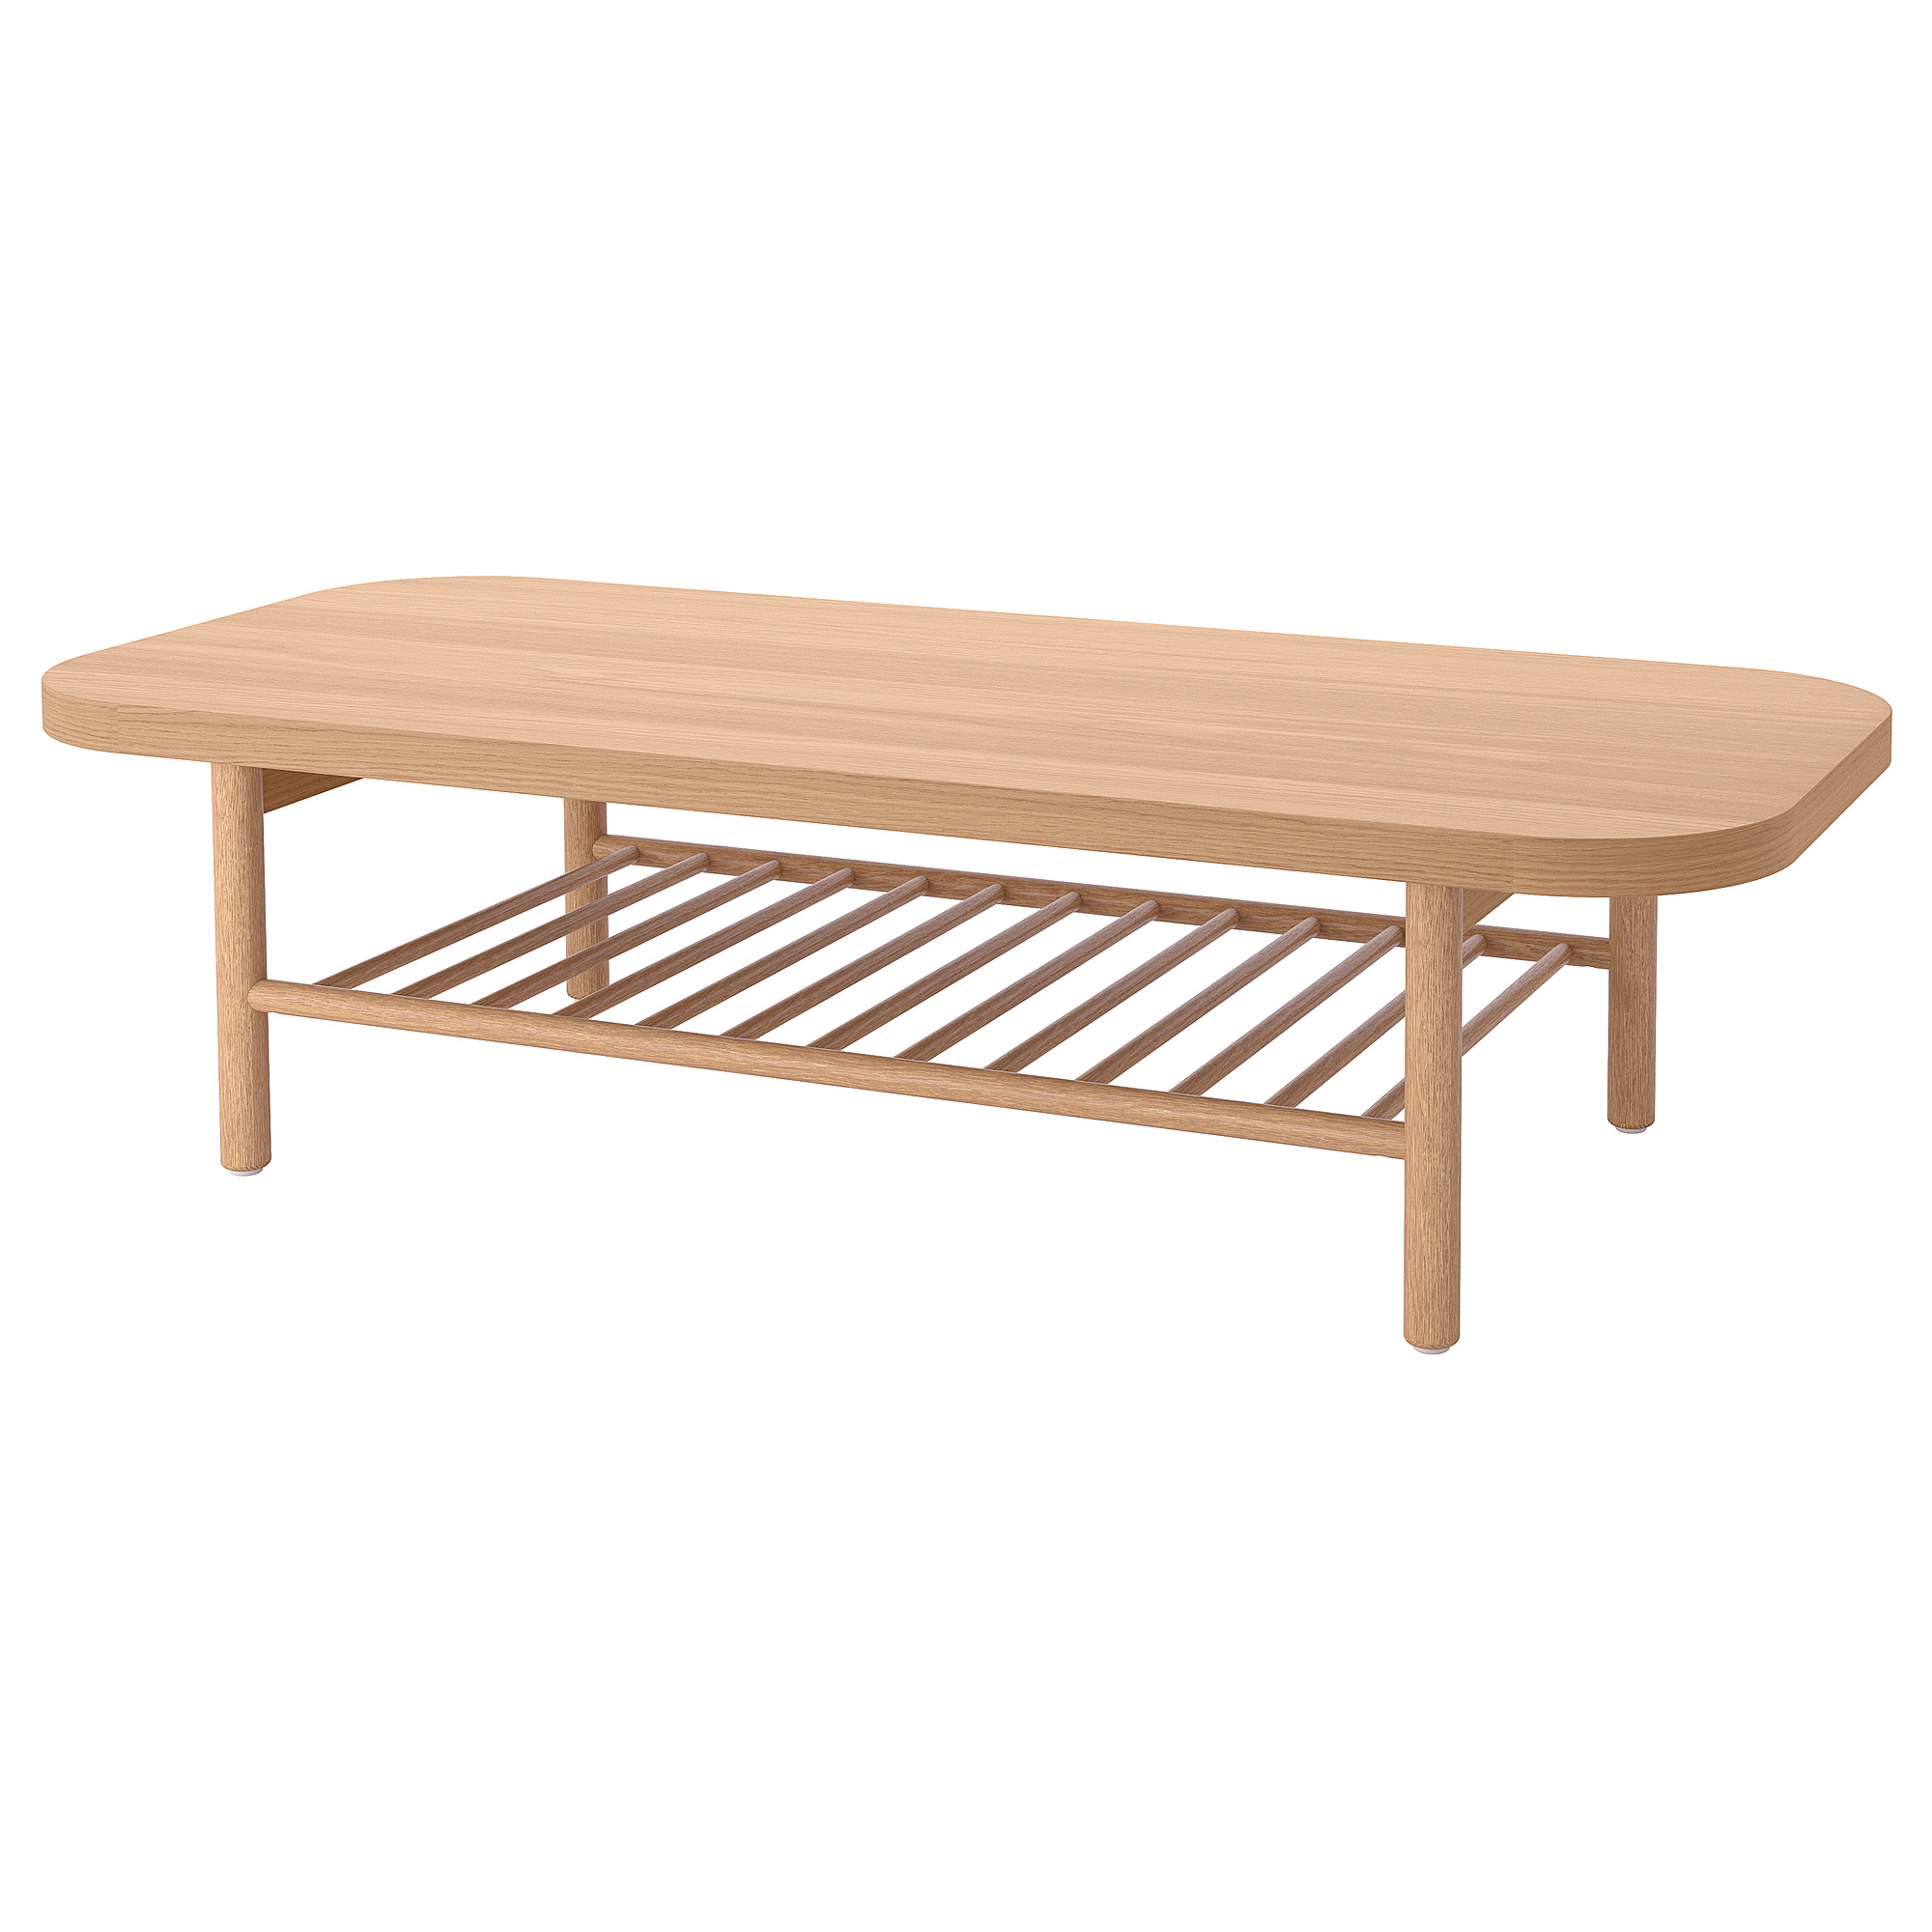 LISTERBY coffee table